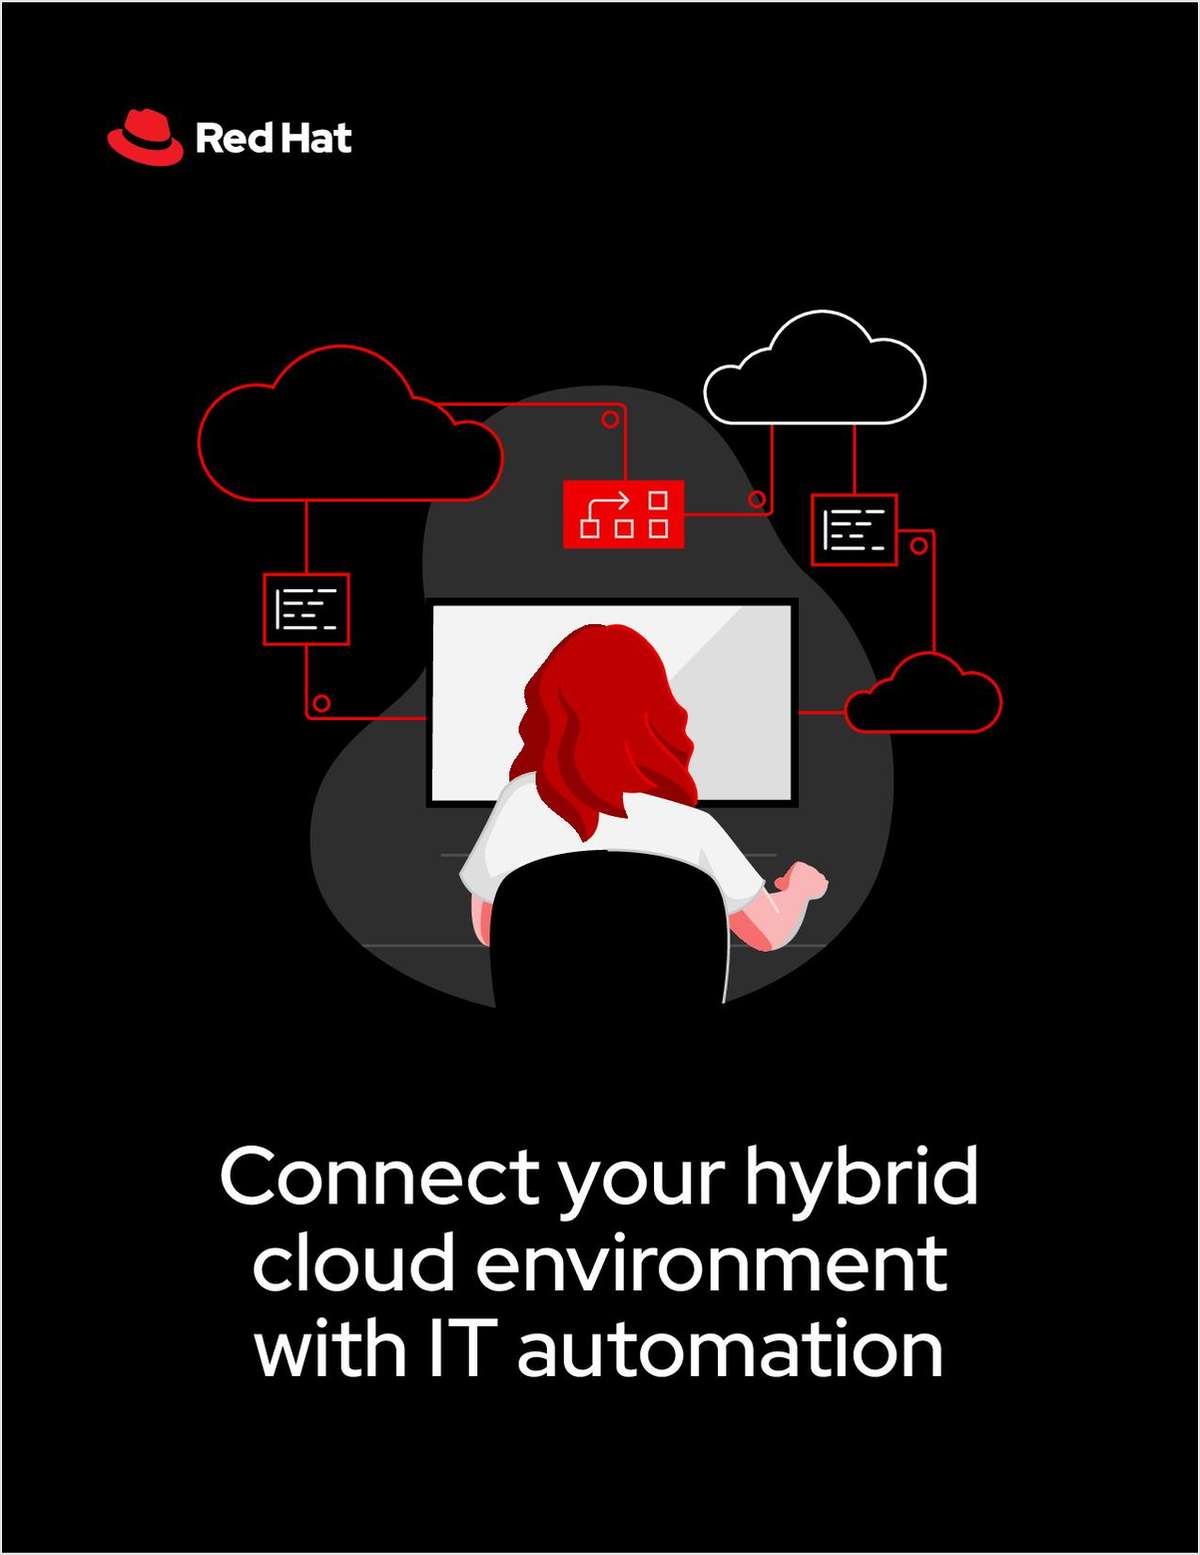 Connect Your Hybrid Cloud Environment with IT Automation